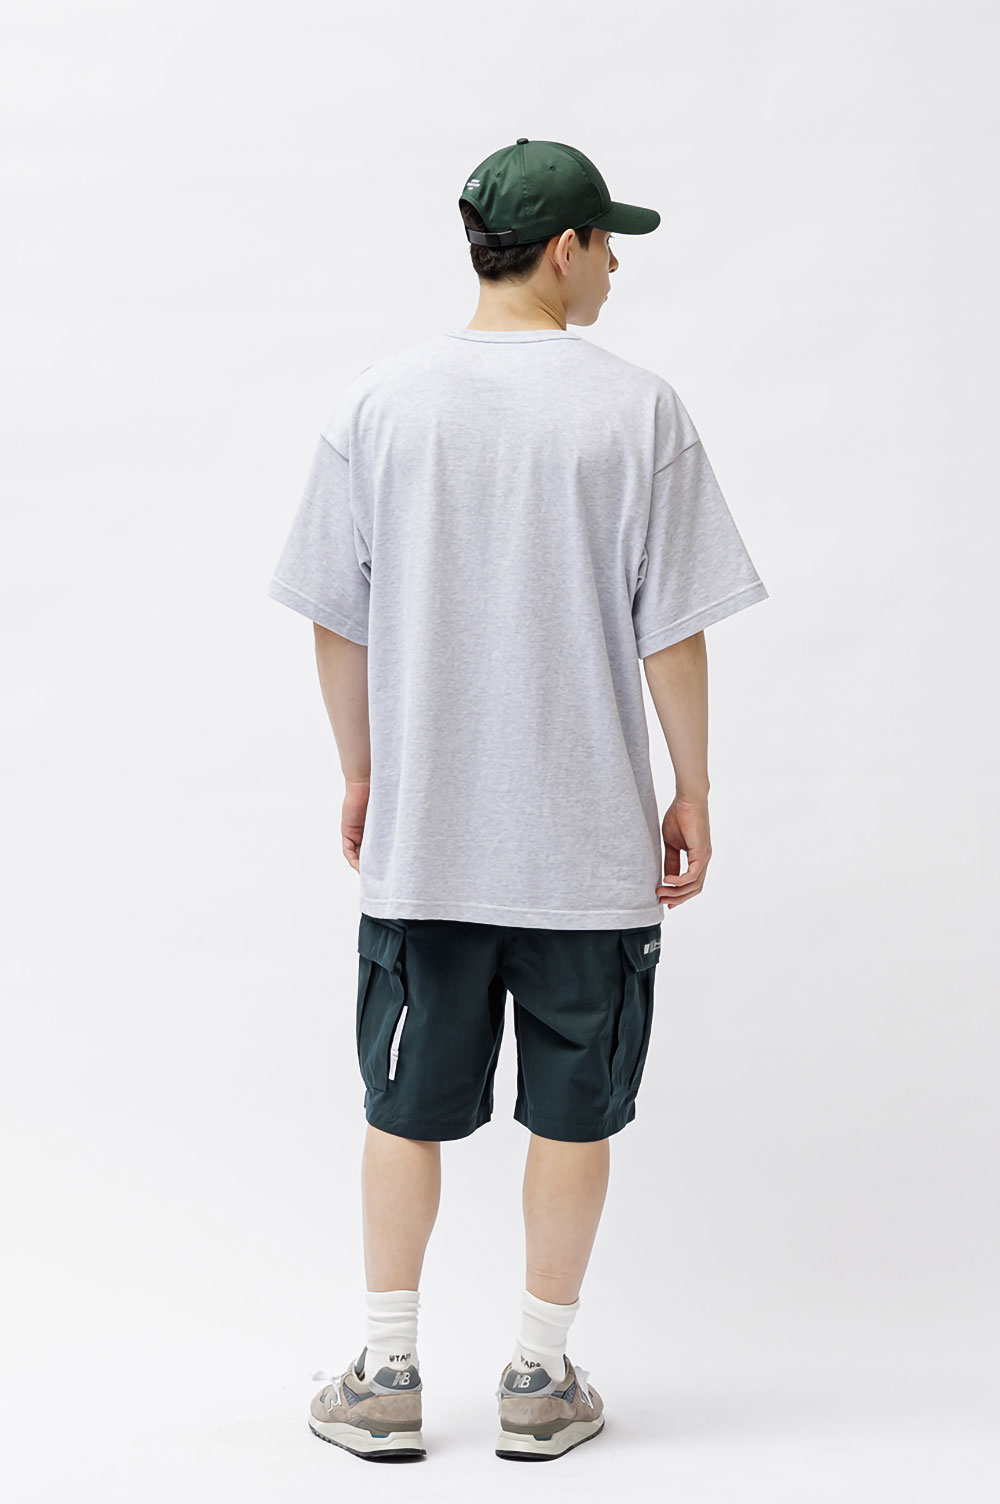 WTAPS ACADEMY SS COTTON COLLEGE ASH GRAYダイワピア | thehairdoctor.clinic